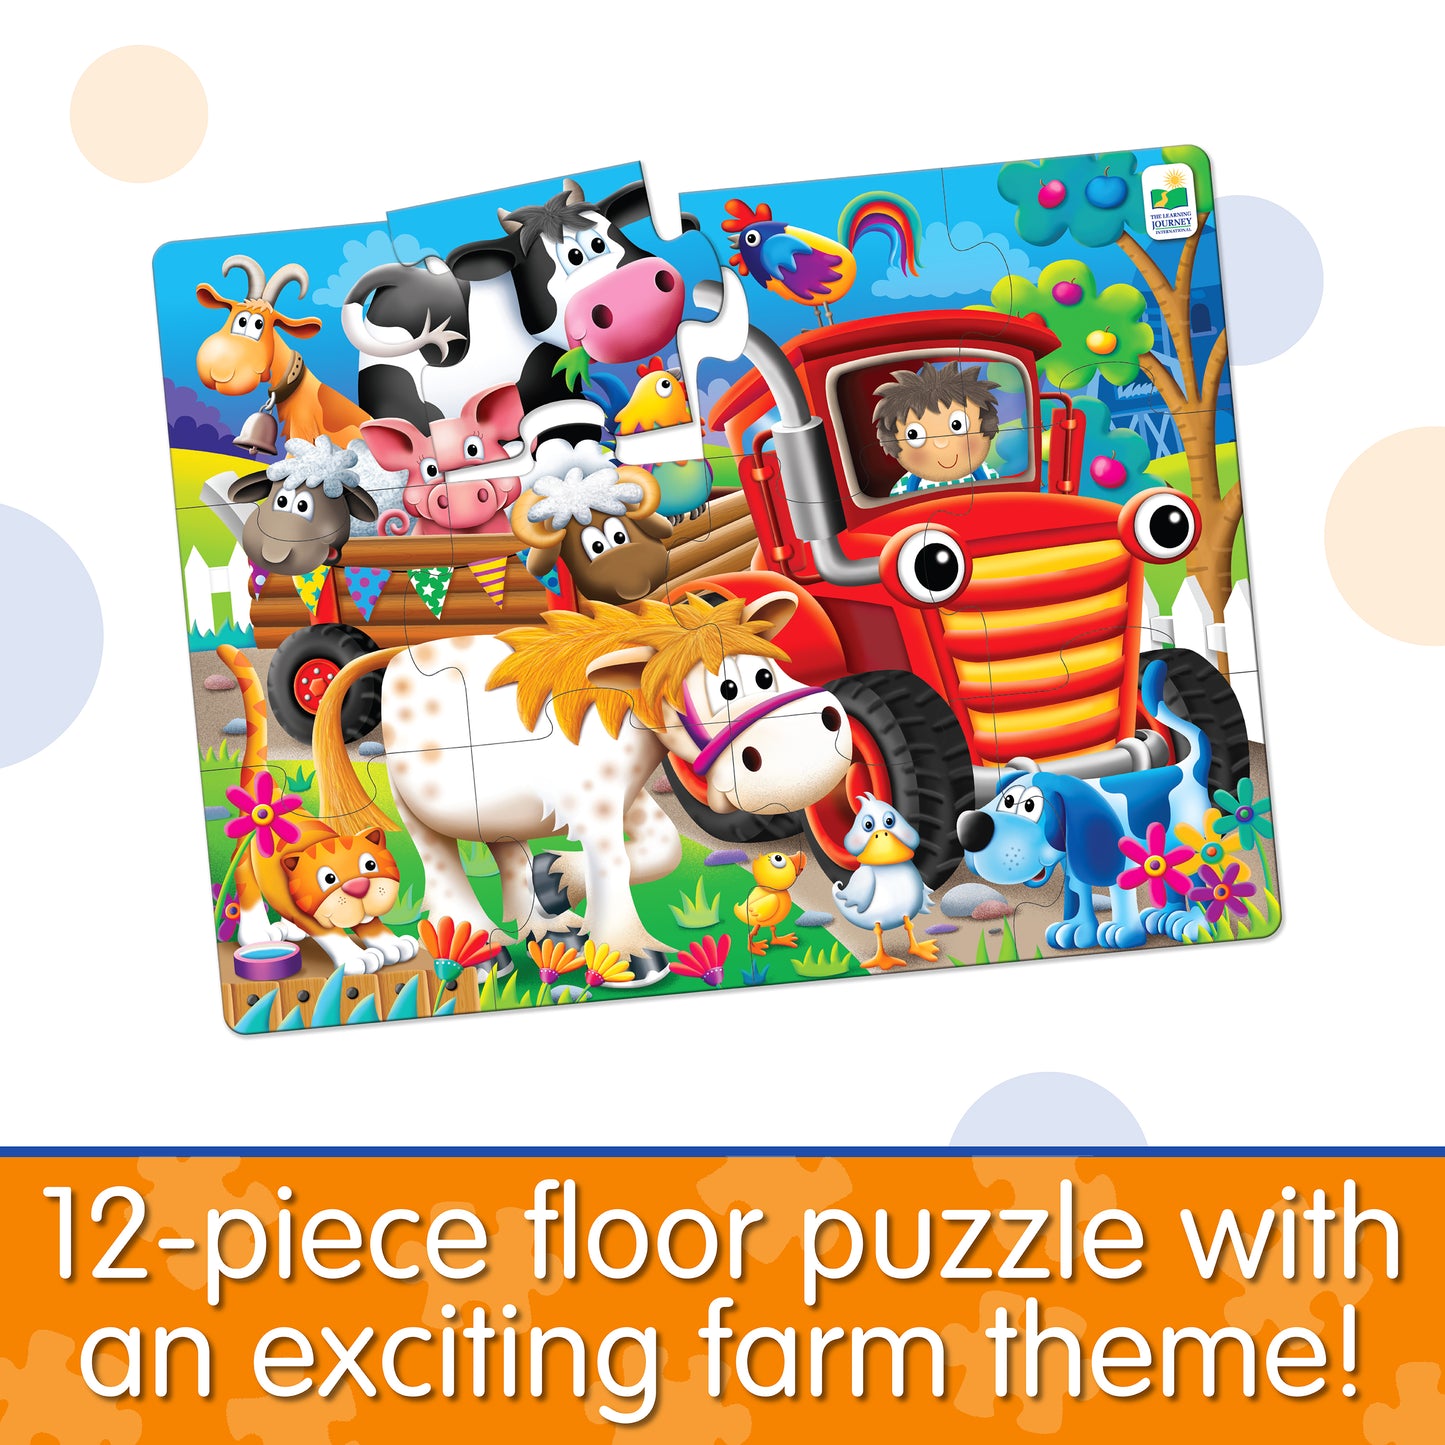 Infographic about My First Big Puzzle - Farm Friends that says, "12-piece floor puzzle with an exciting farm theme!"